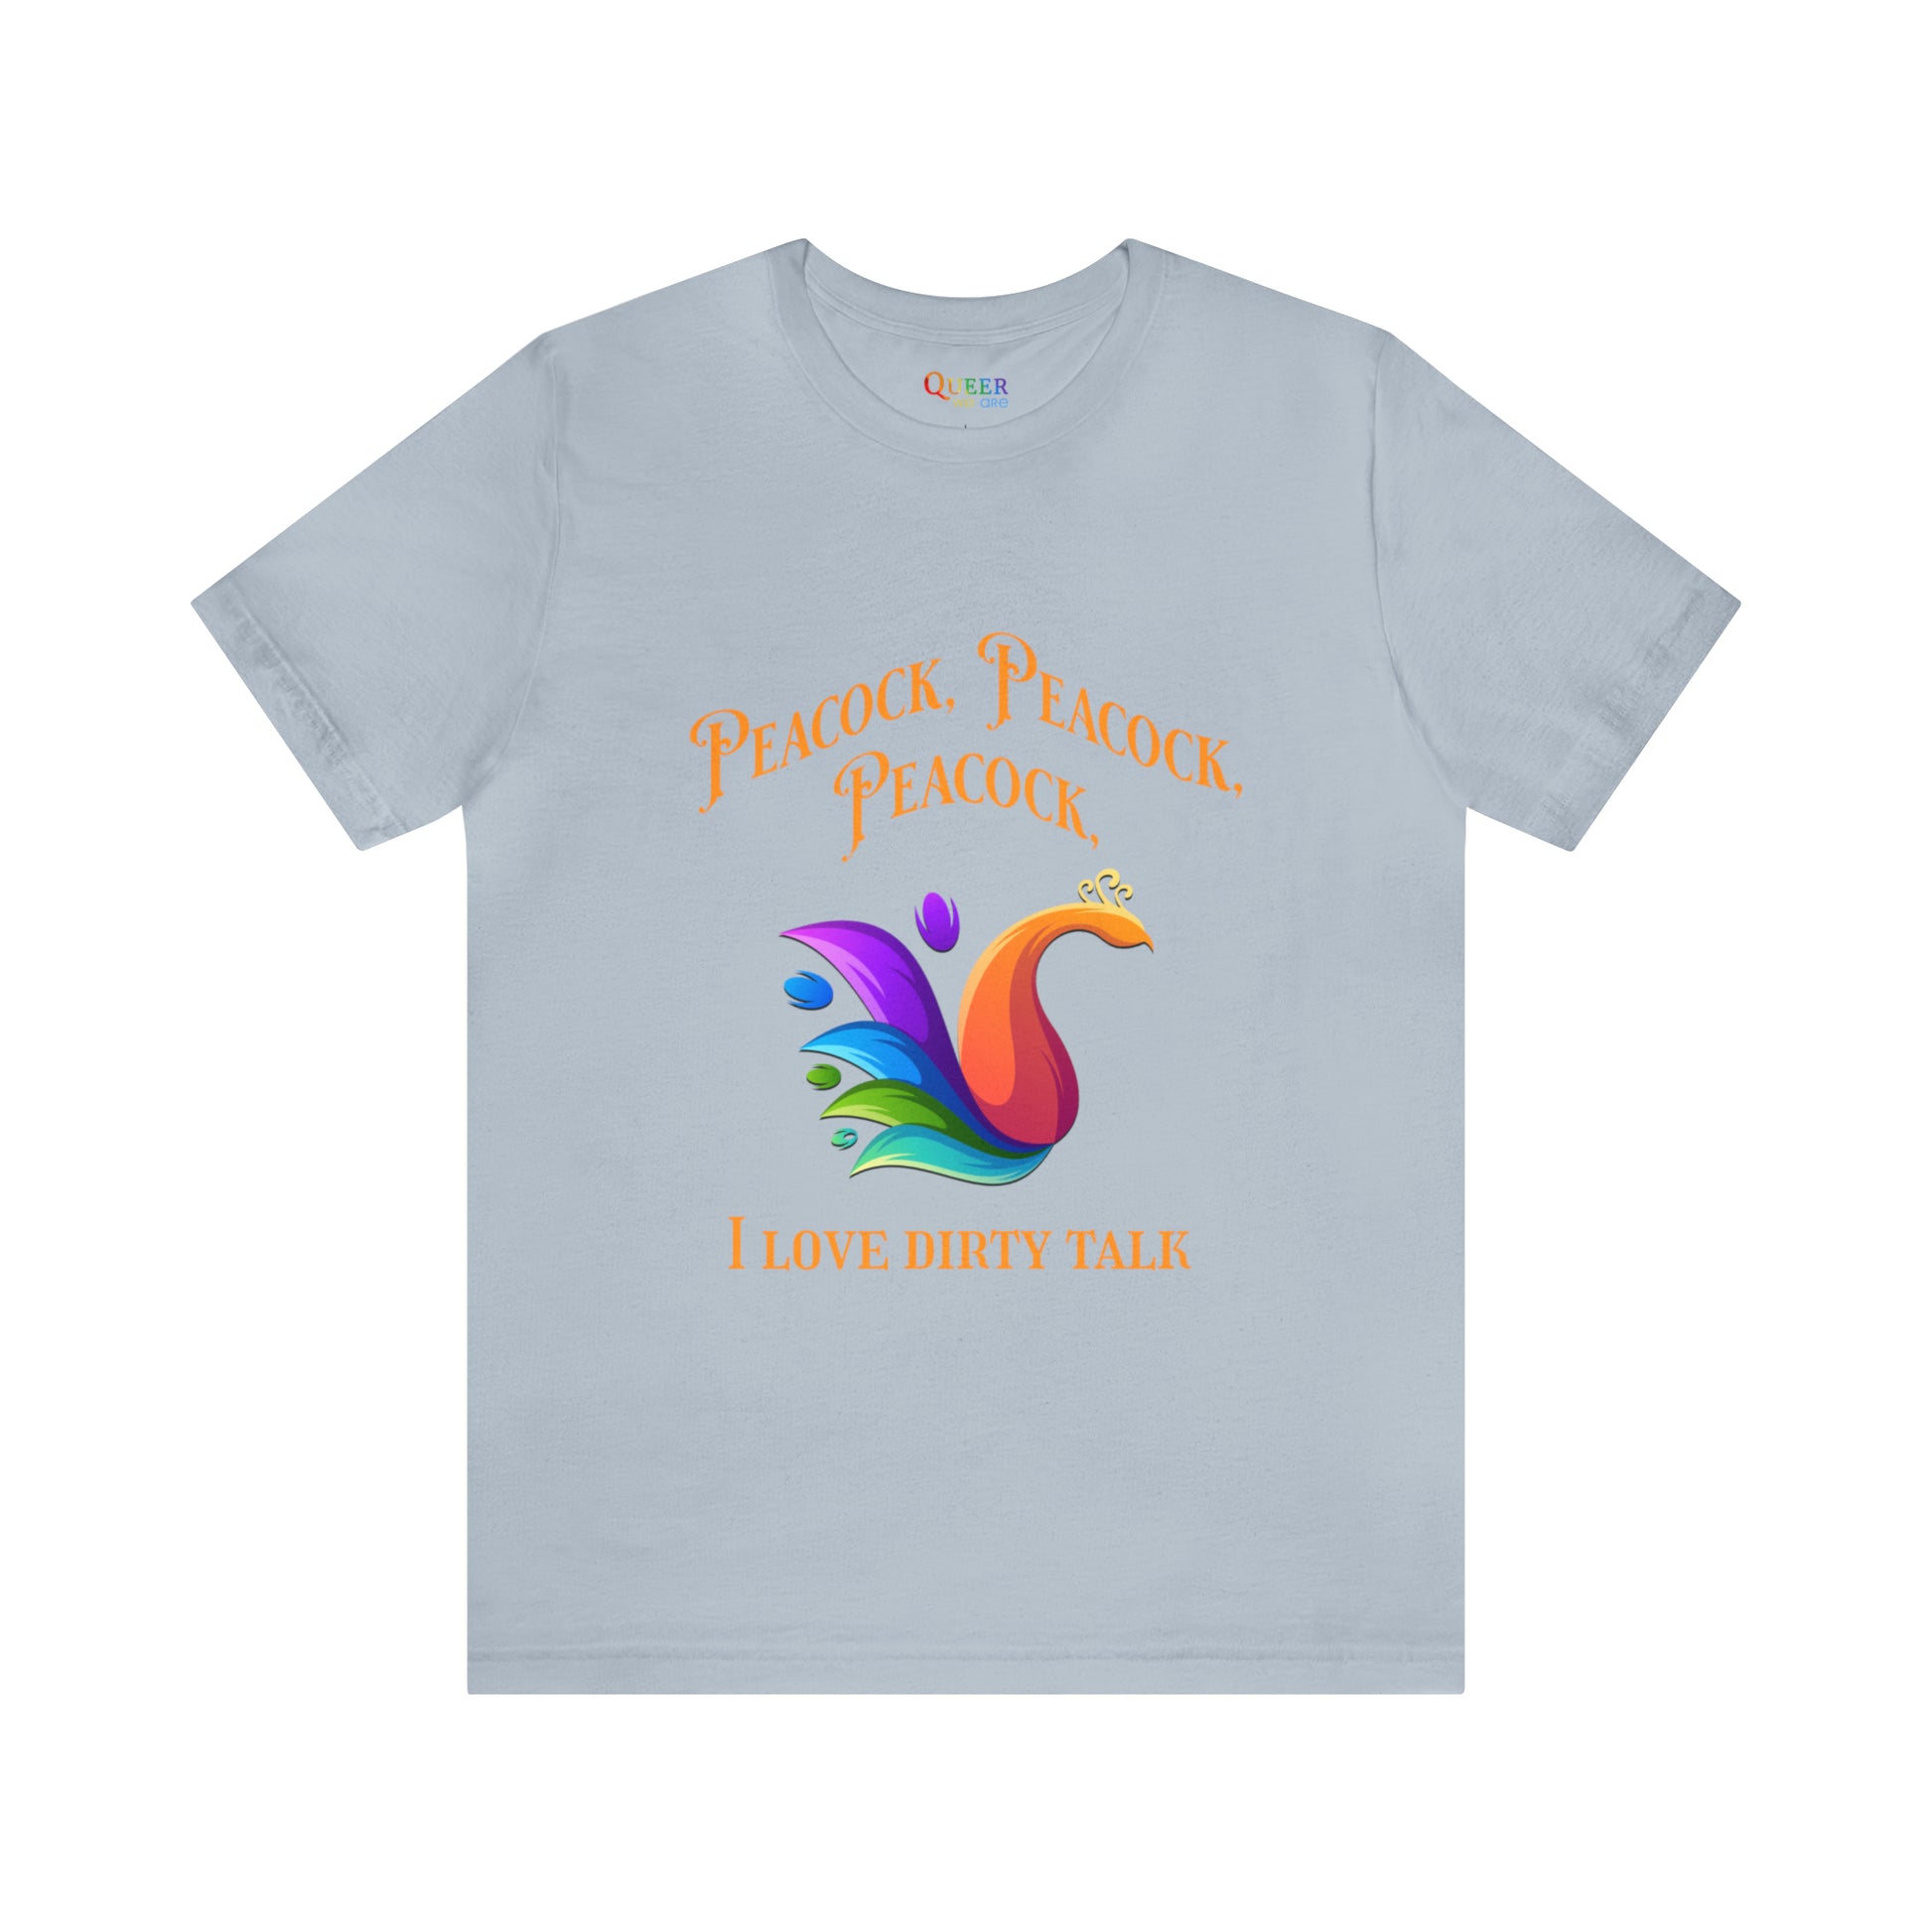 Peacock Peacock Peacock I Love Dirty Talk Unisex T-shirt - Queer We Are Shop